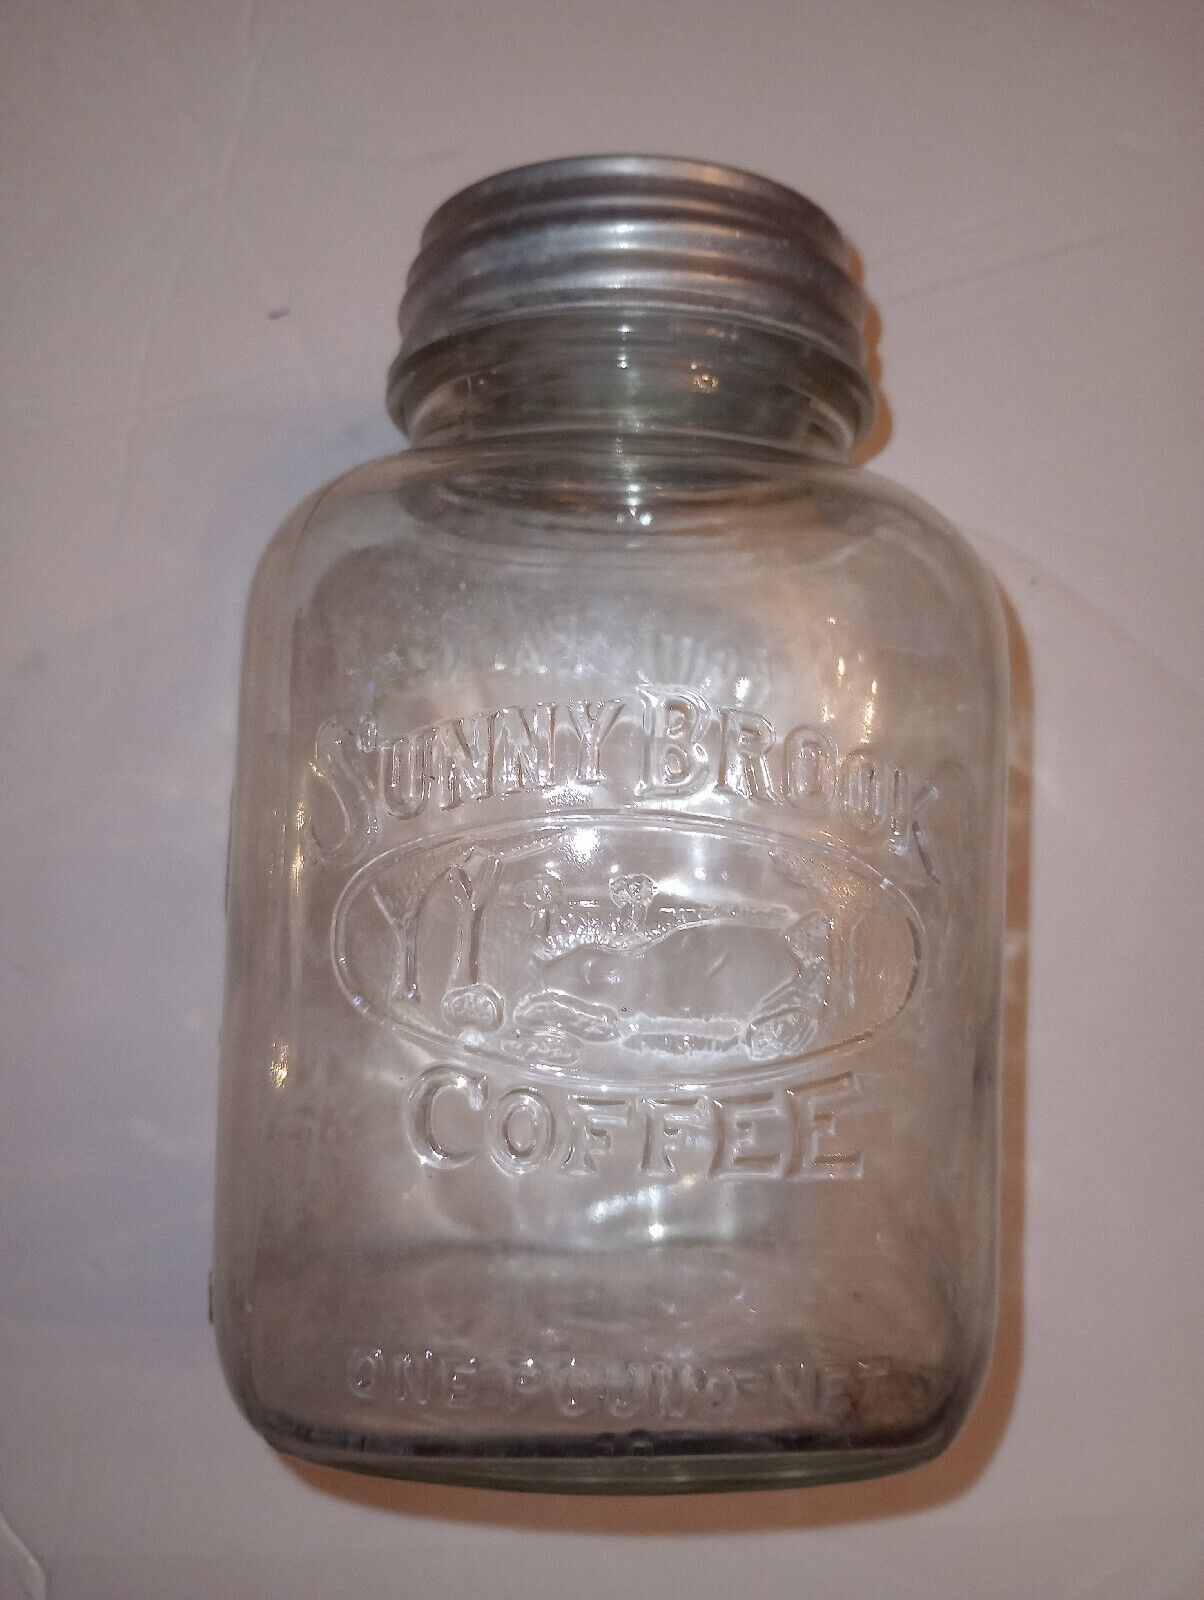 Vintage Sunny Brook Coffee 1 LB Glass Large Jar, Every Swallow Brings You Joy